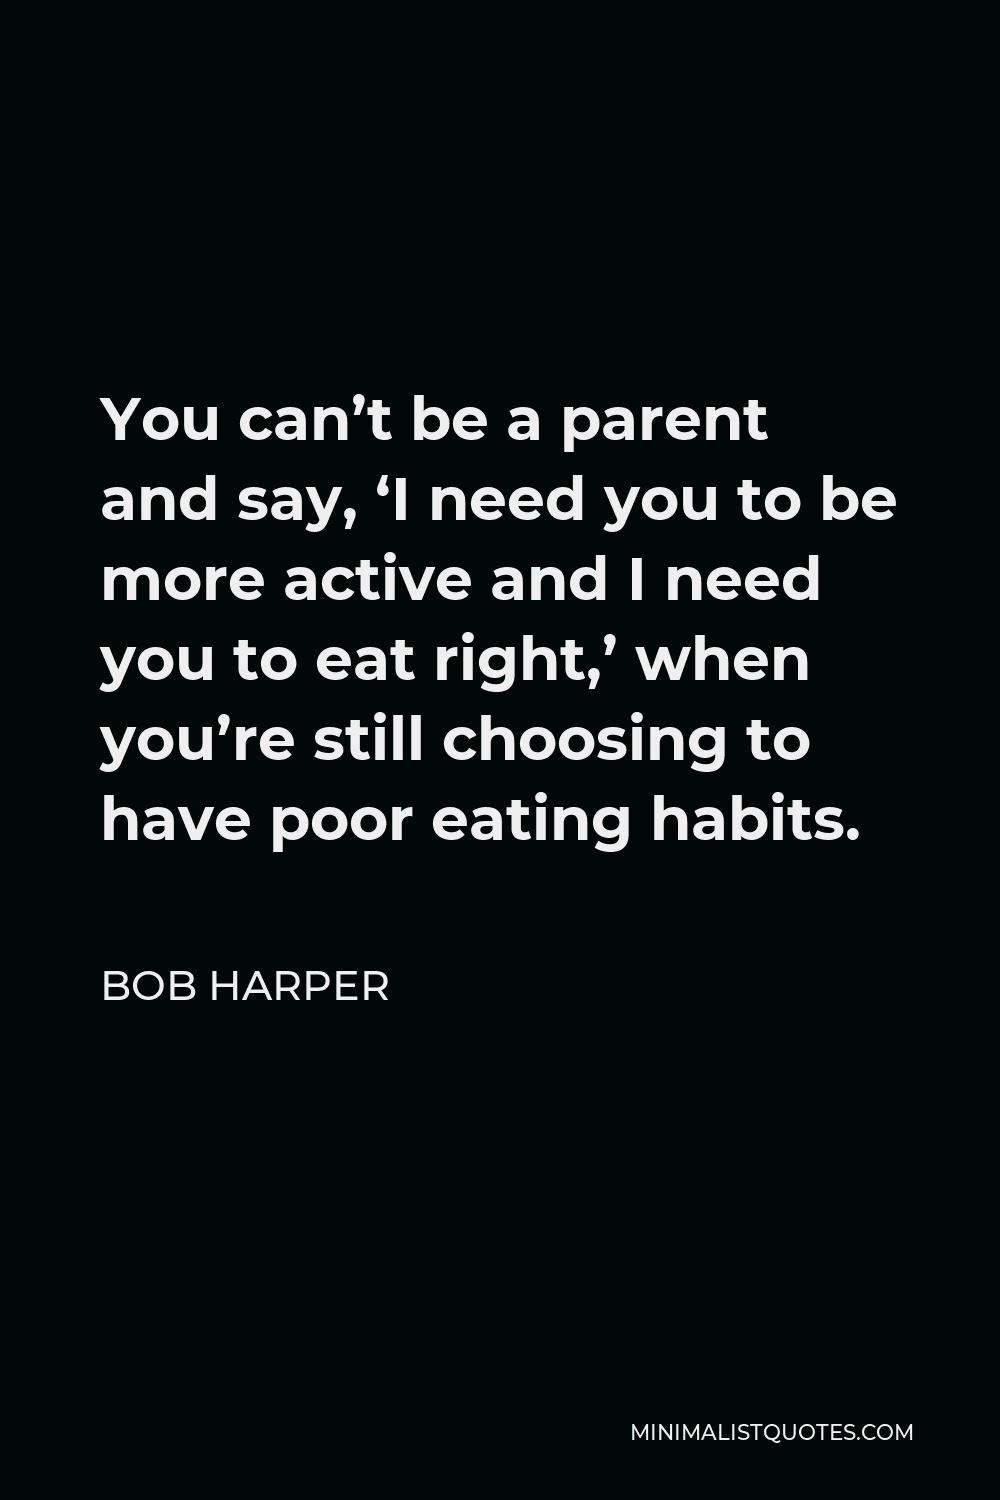 Bob Harper Quote - You can’t be a parent and say, ‘I need you to be more active and I need you to eat right,’ when you’re still choosing to have poor eating habits.